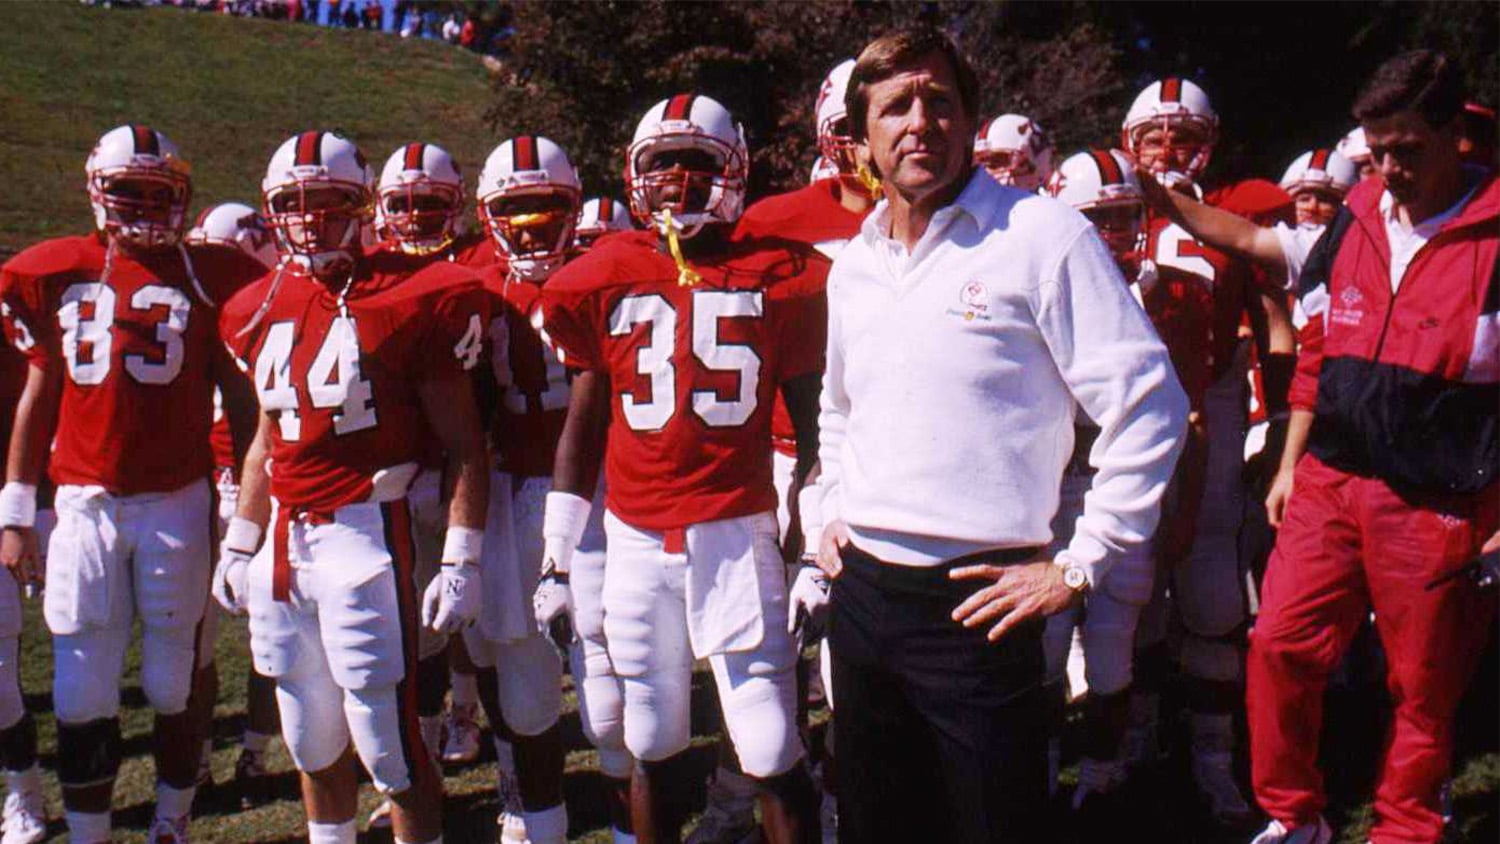 Dick Sheridan stands at the front of a group of uniformed NC State football players